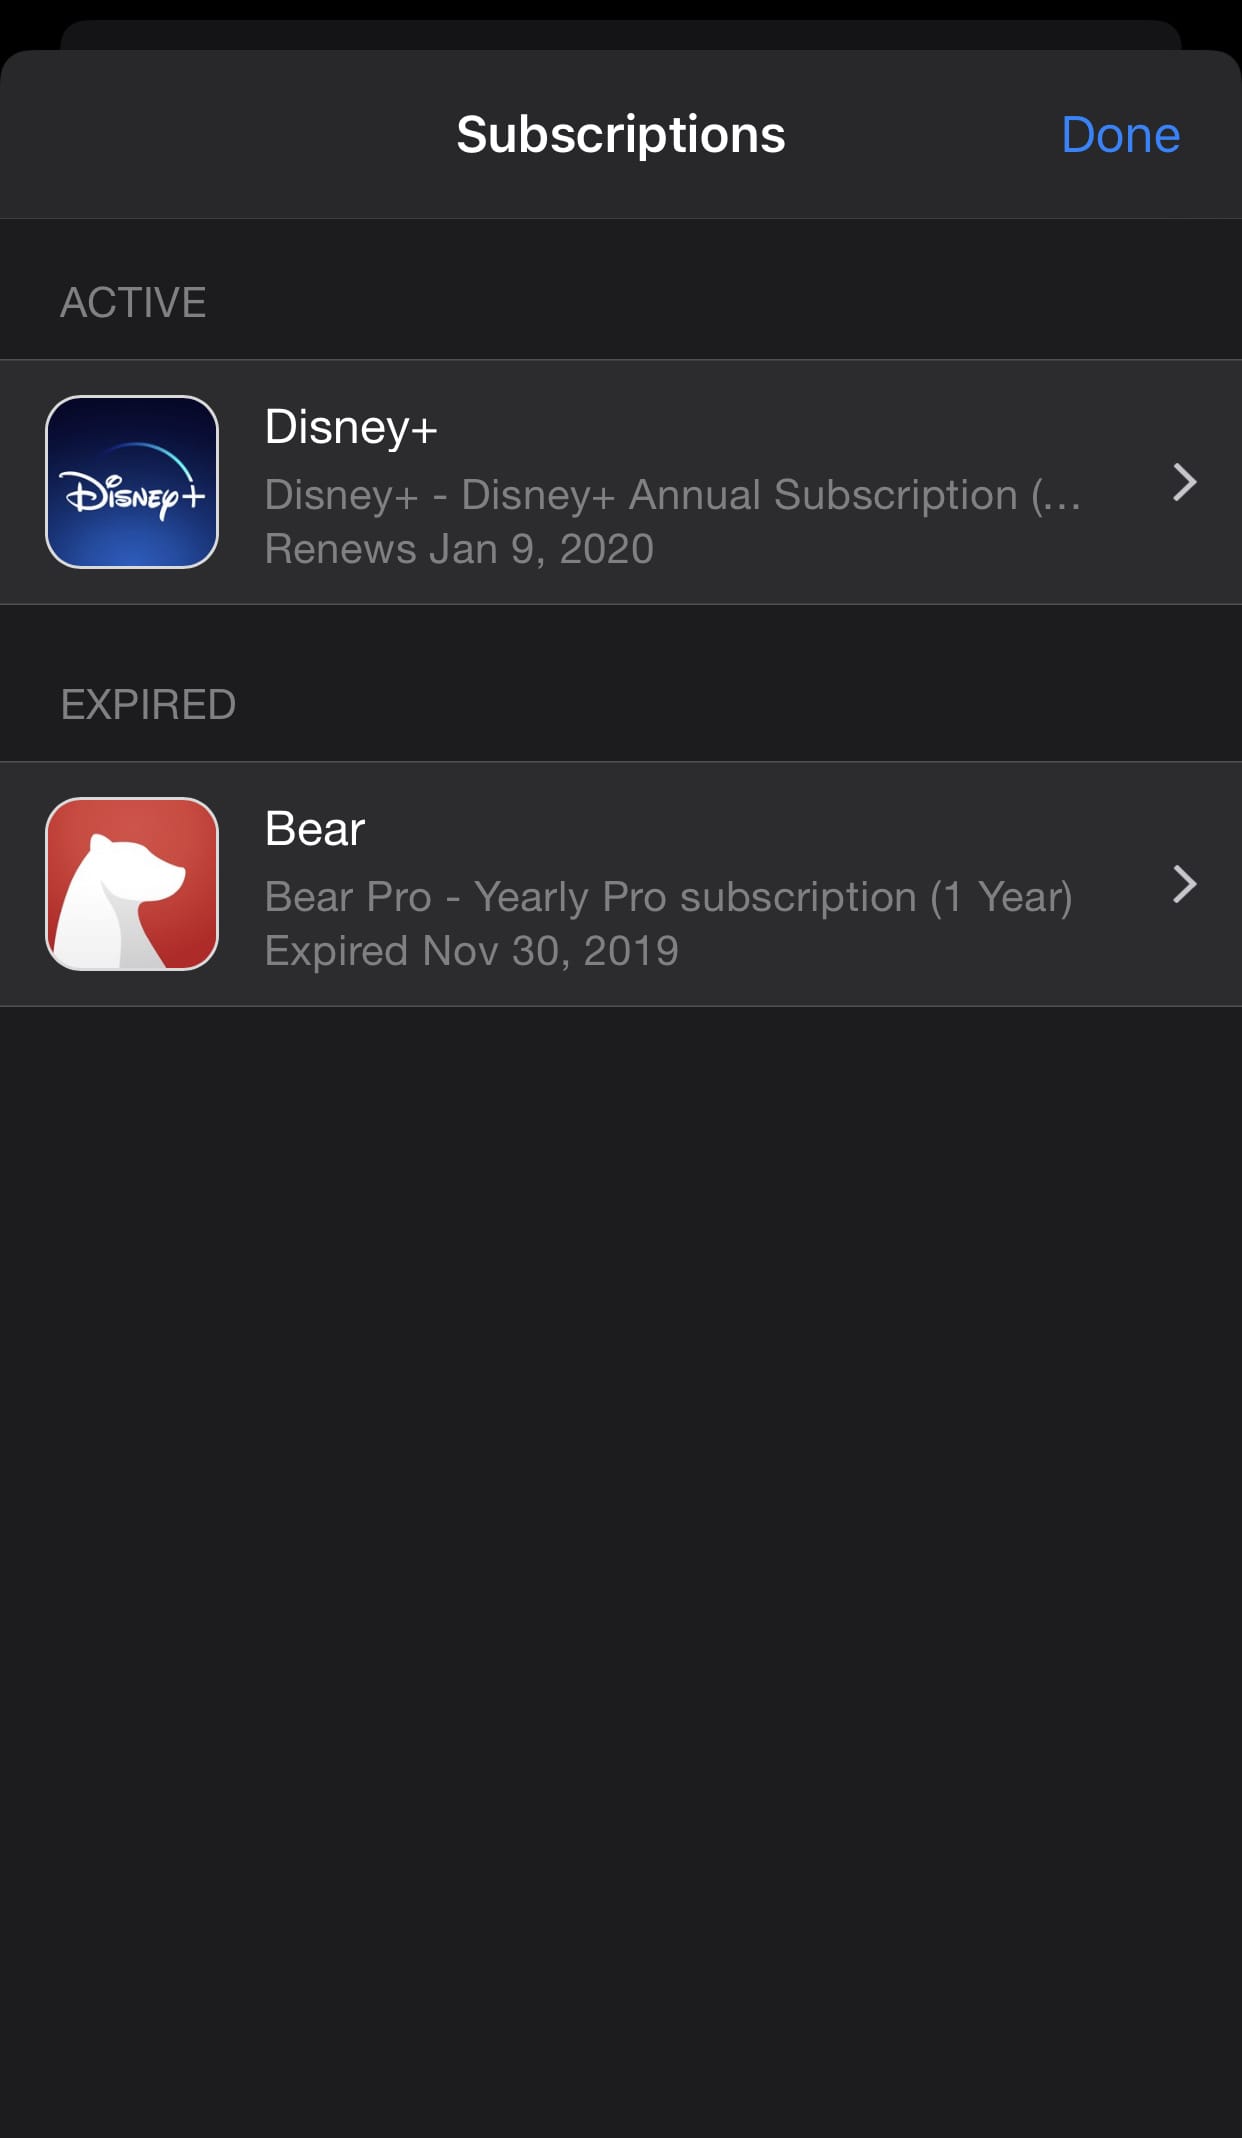 Subscription management in iOS